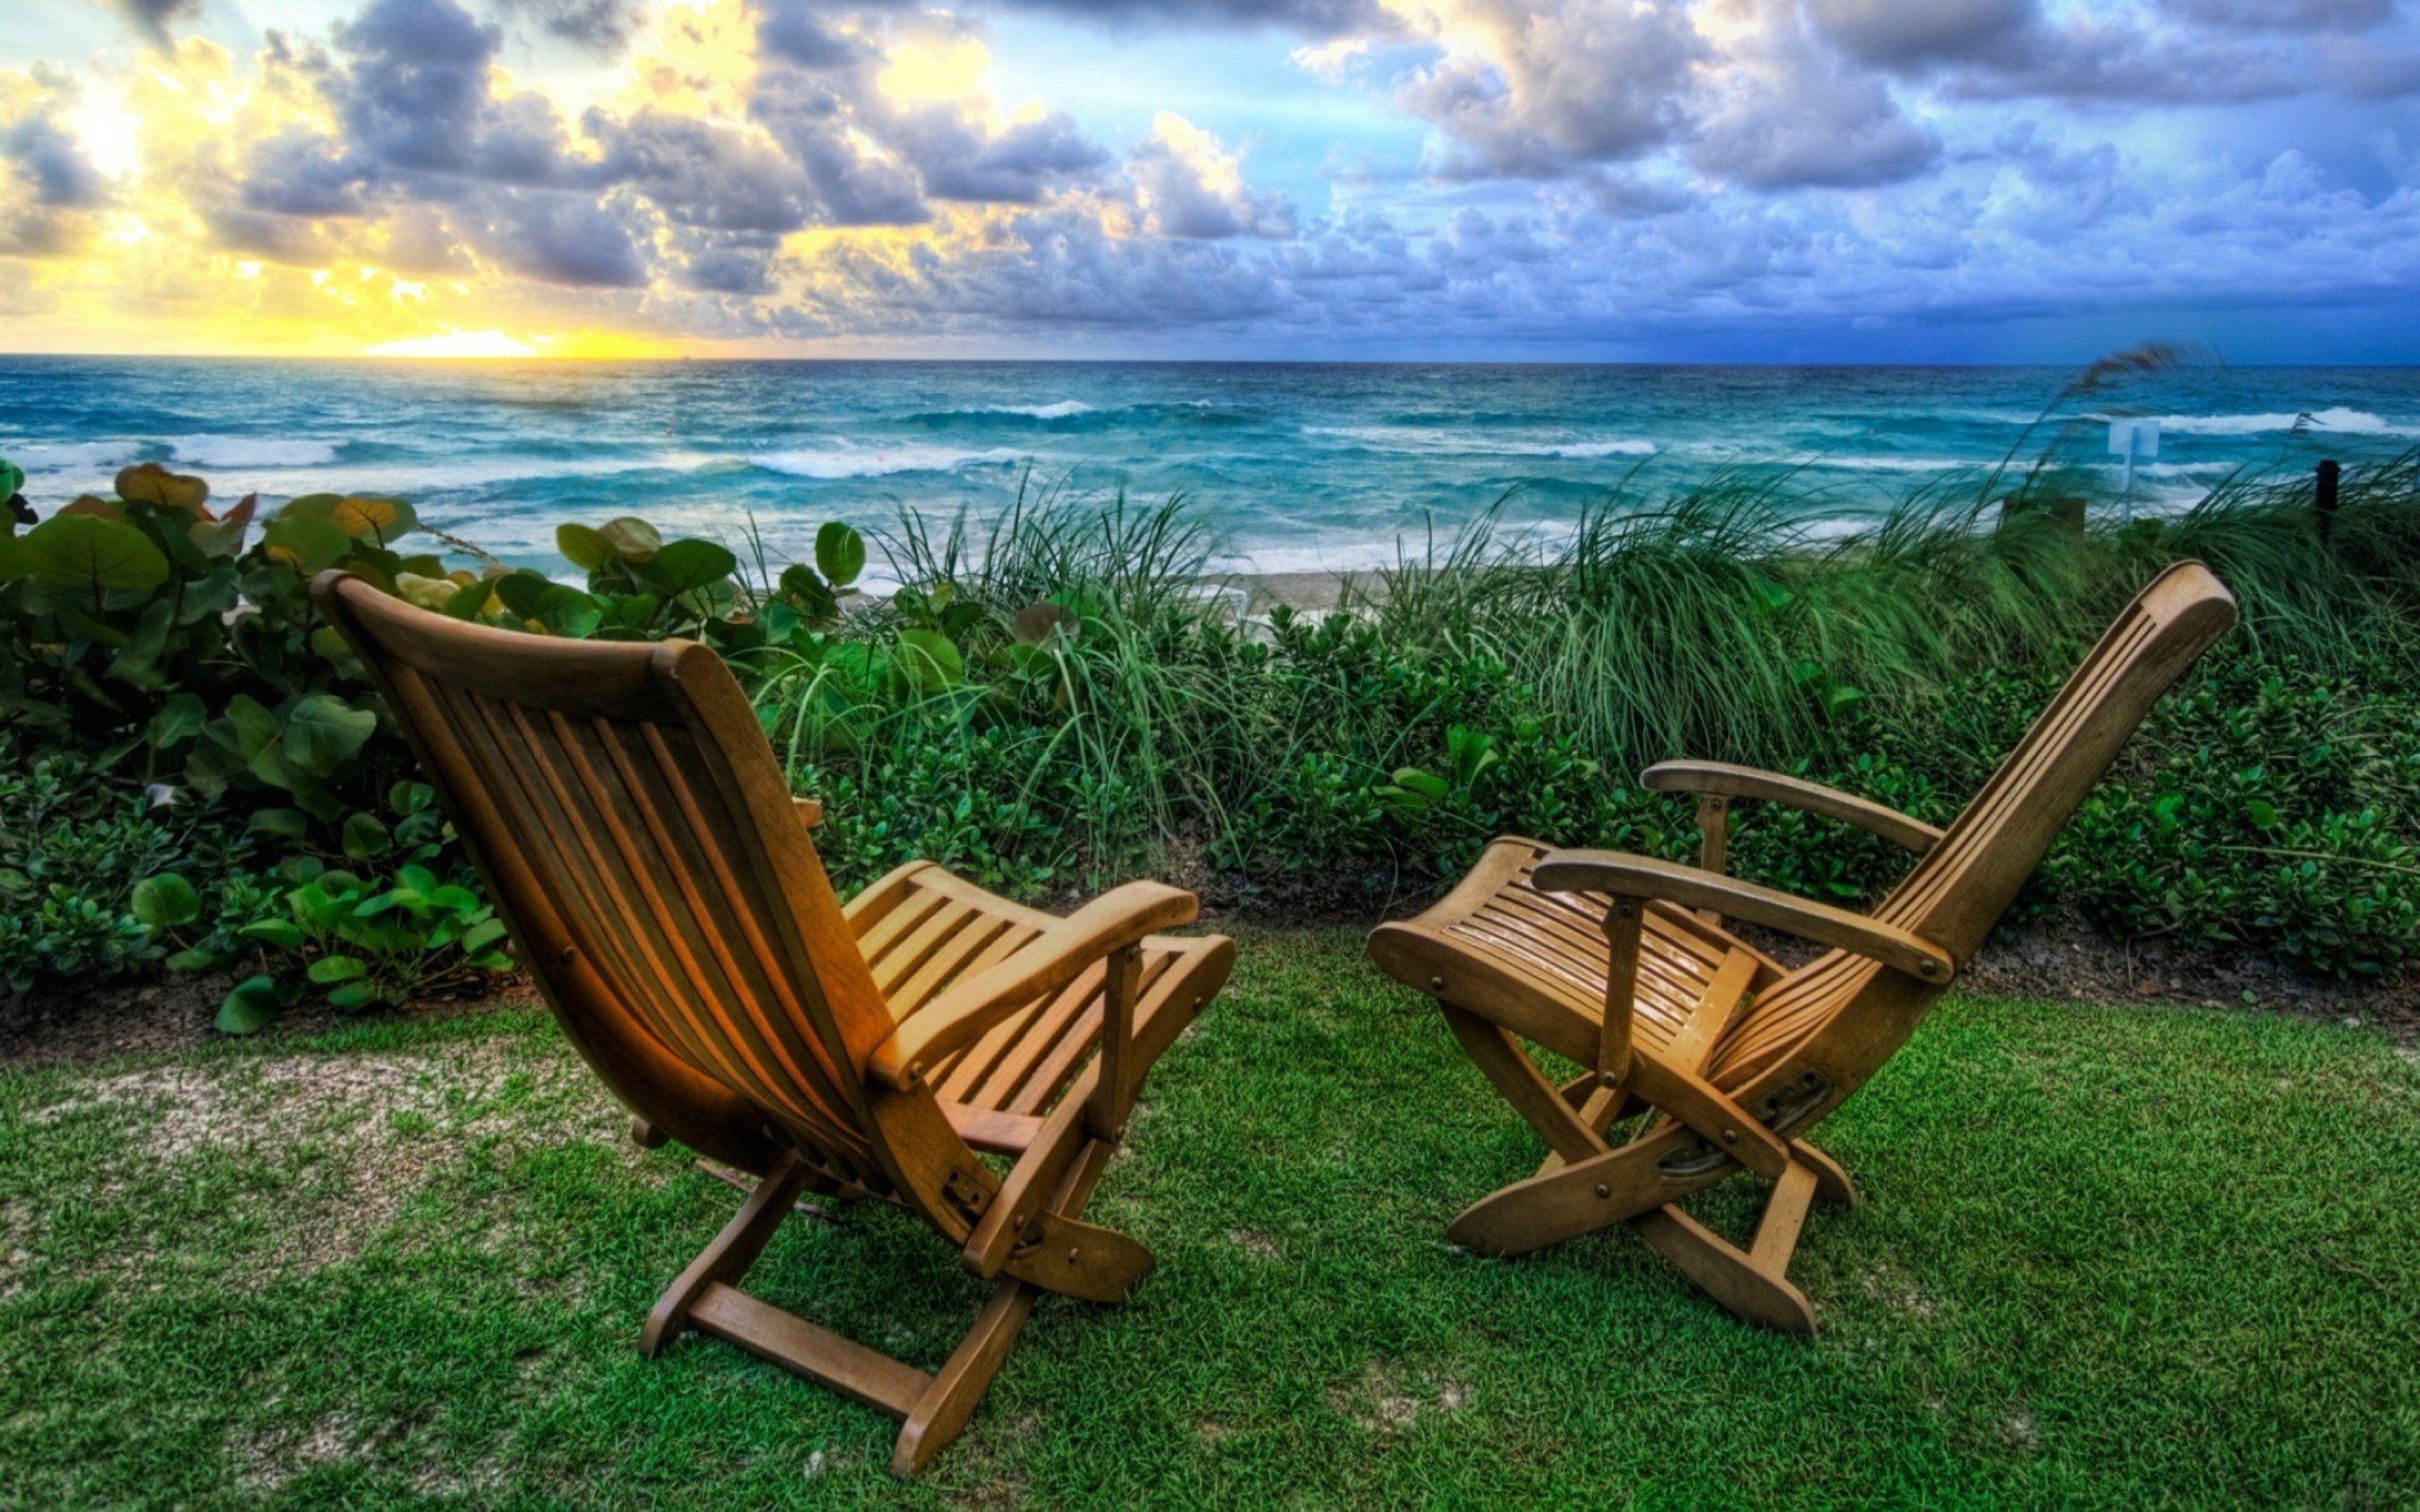 Chairs With Sea View wallpaper 2560x1600